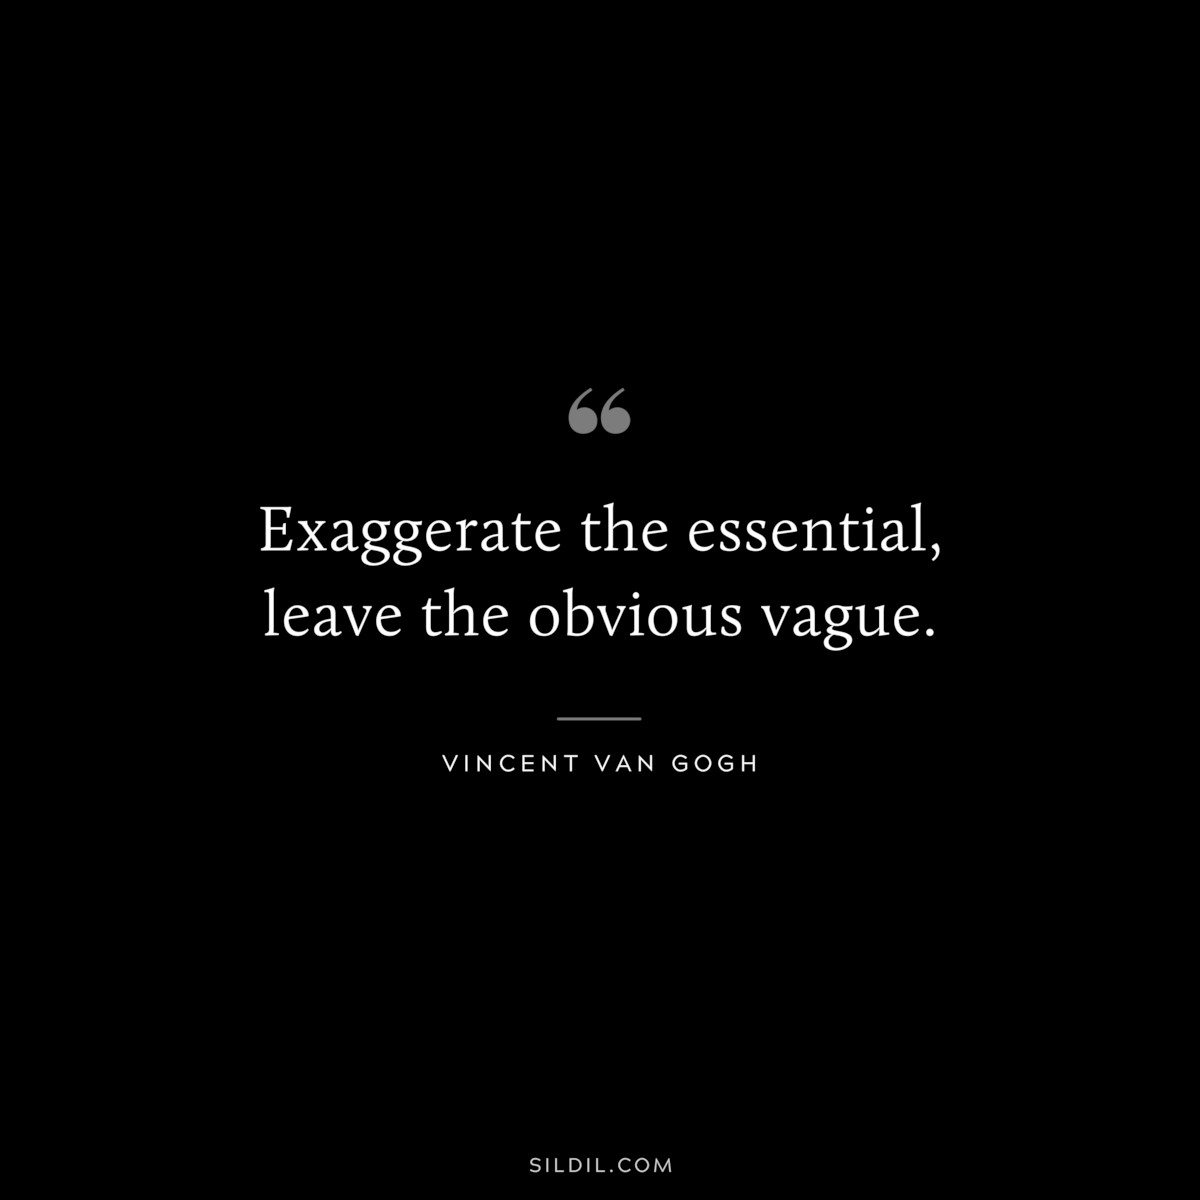 Exaggerate the essential, leave the obvious vague. ― Vincent van Gogh